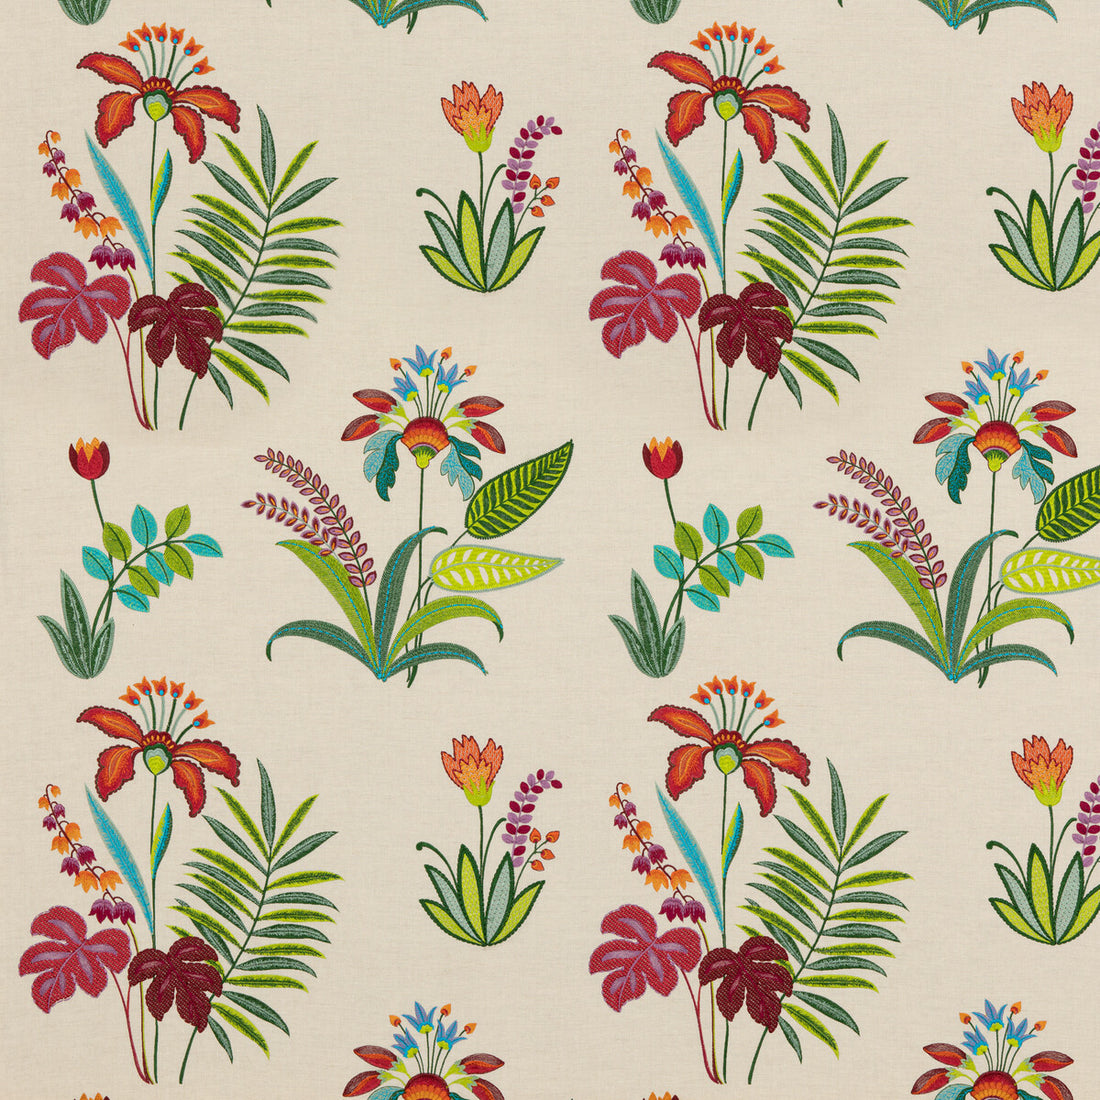 Botanical Paradise fabric in multi color - pattern PF50466.1.0 - by Baker Lifestyle in the Fiesta collection